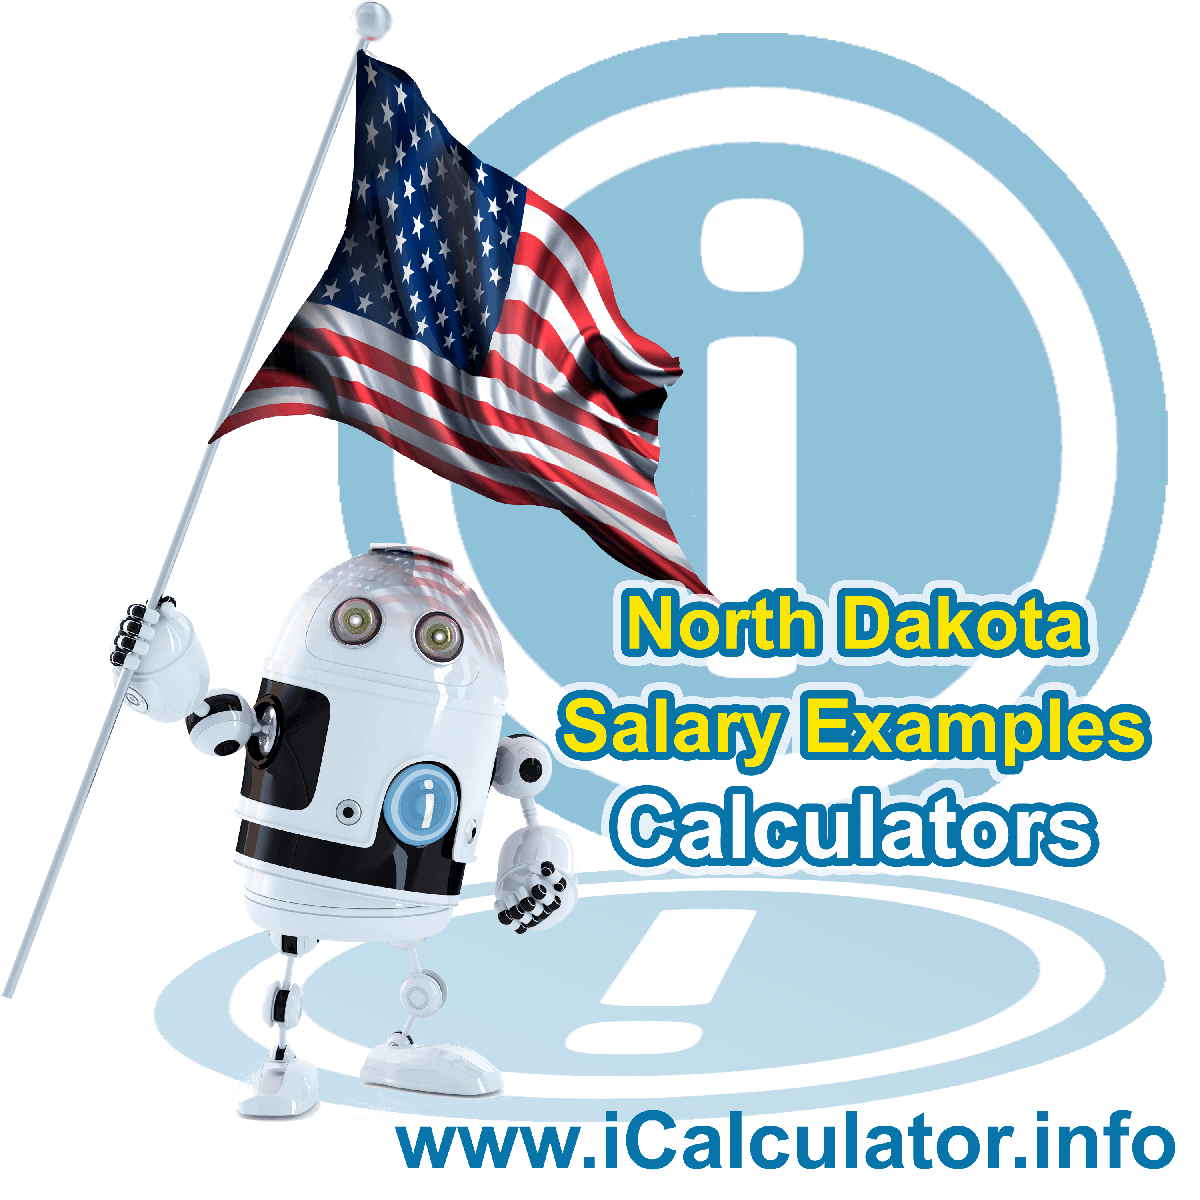 North Dakota Salary Example for $ 190,000.00 in 2023 | iCalculator™ | $ 190,000.00 salary example for employee and employer paying North Dakota State tincome taxes. Detailed salary after tax calculation including North Dakota State Tax, Federal State Tax, Medicare Deductions, Social Security, Capital Gains and other income tax and salary deductions complete with supporting North Dakota state tax tables 